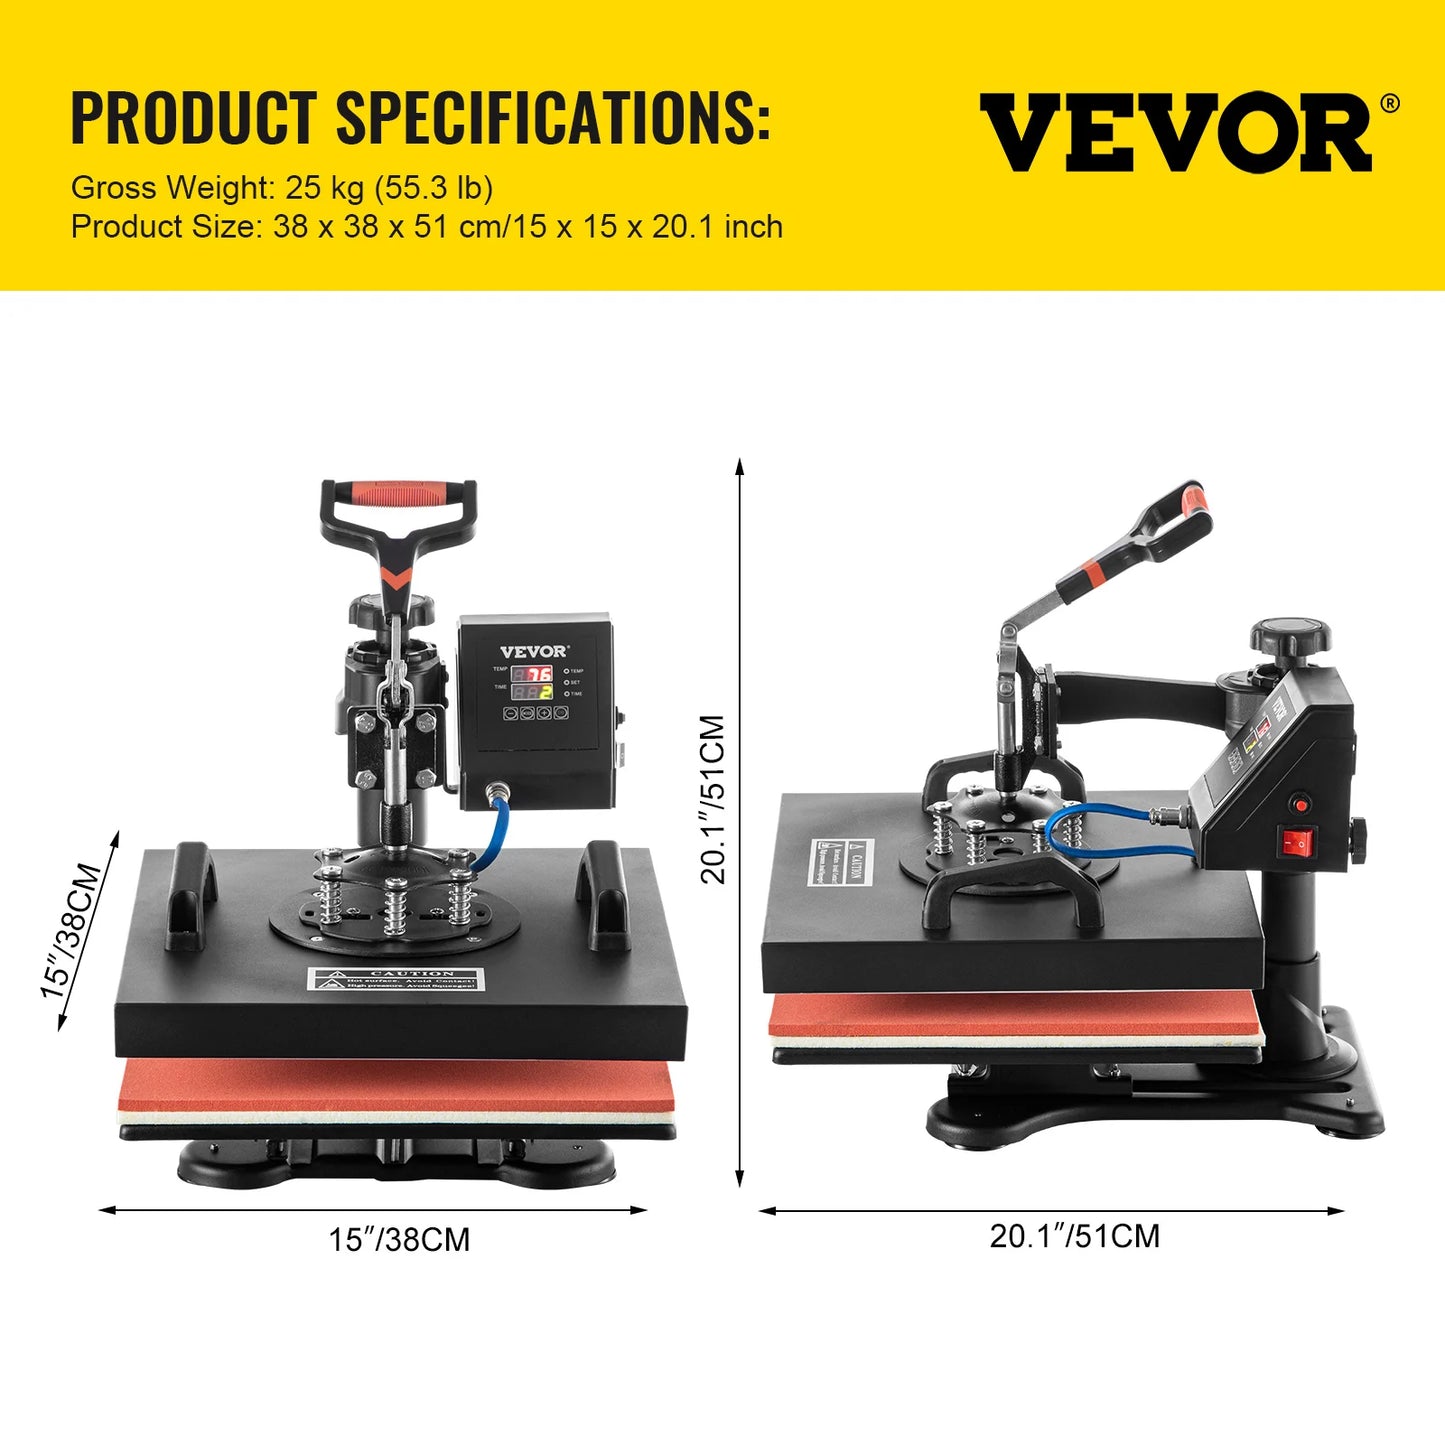 VEVOR 5 in 1 Heat Press Double Display Digital Multifunctional Sublimation for DIY T-Shirts Clothes Hat Mug Cap Plate